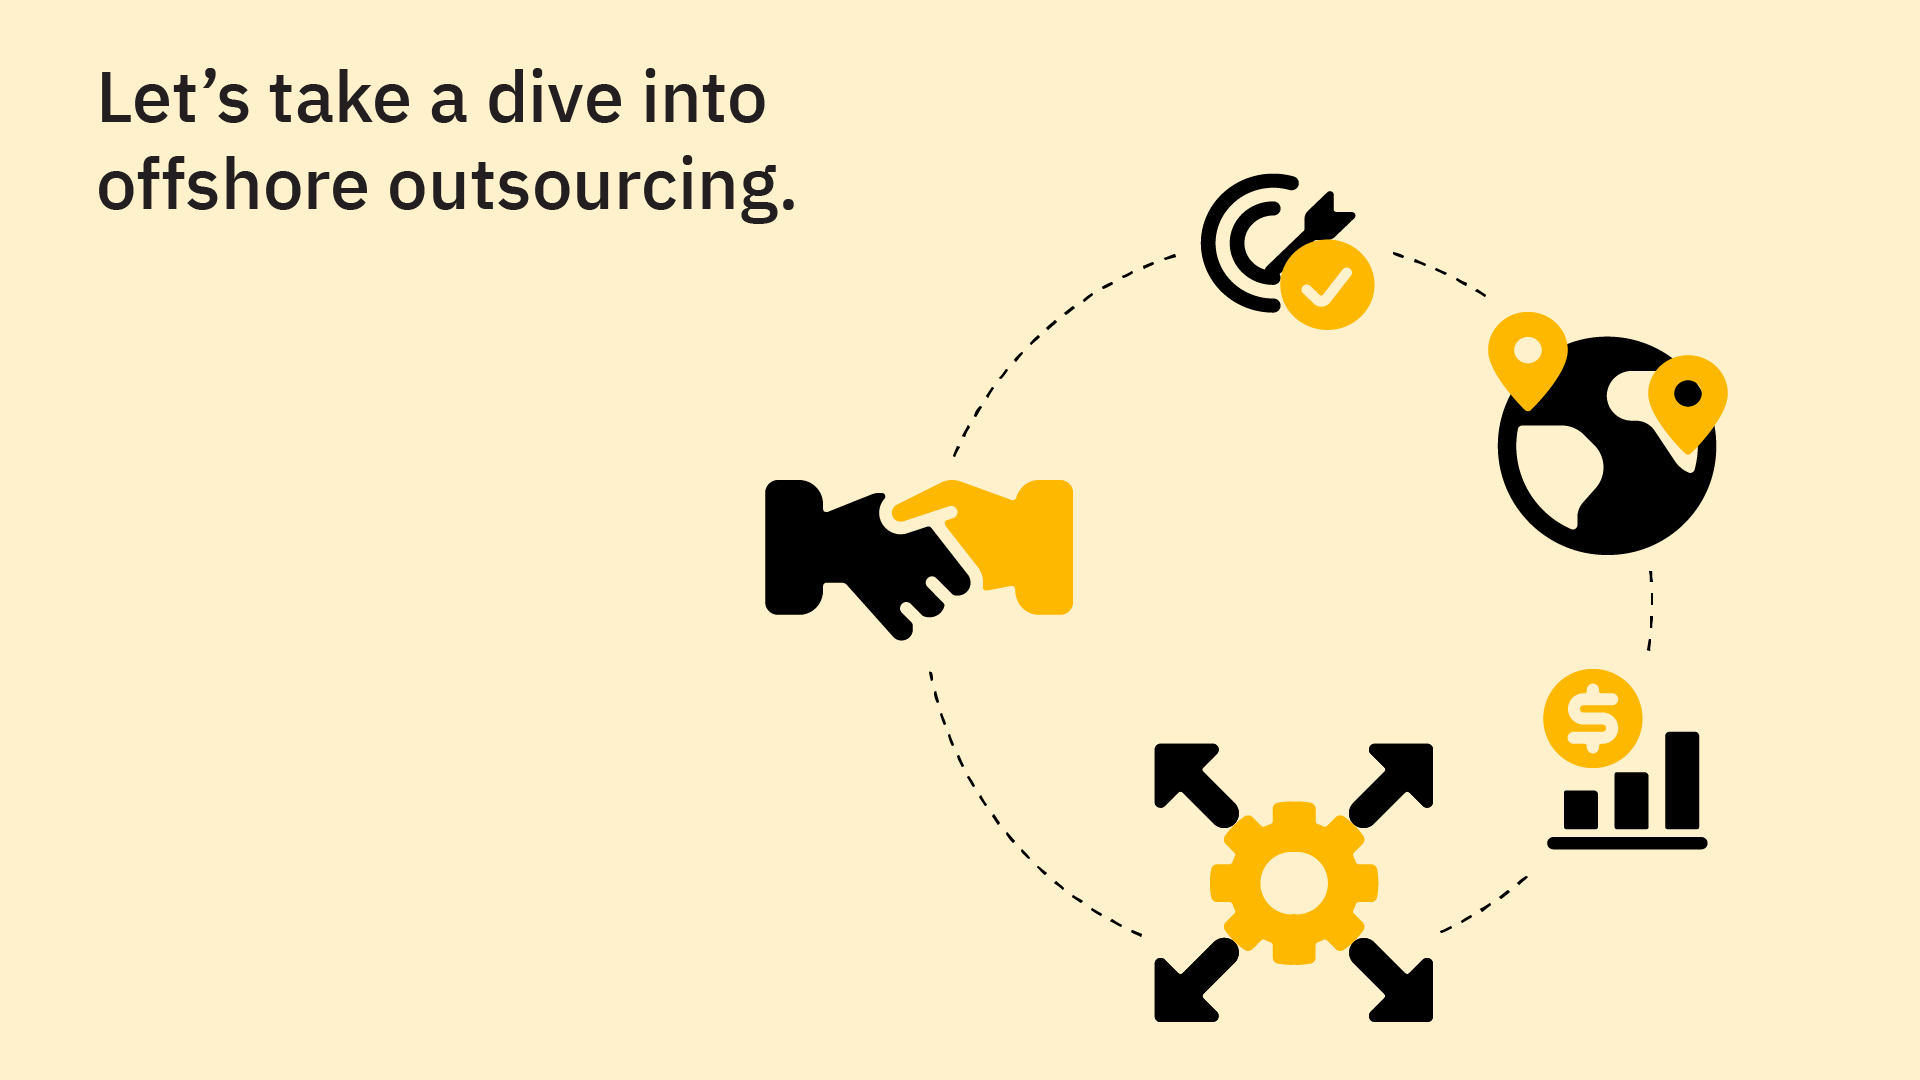 An infographic representing the offshore outsourcing process